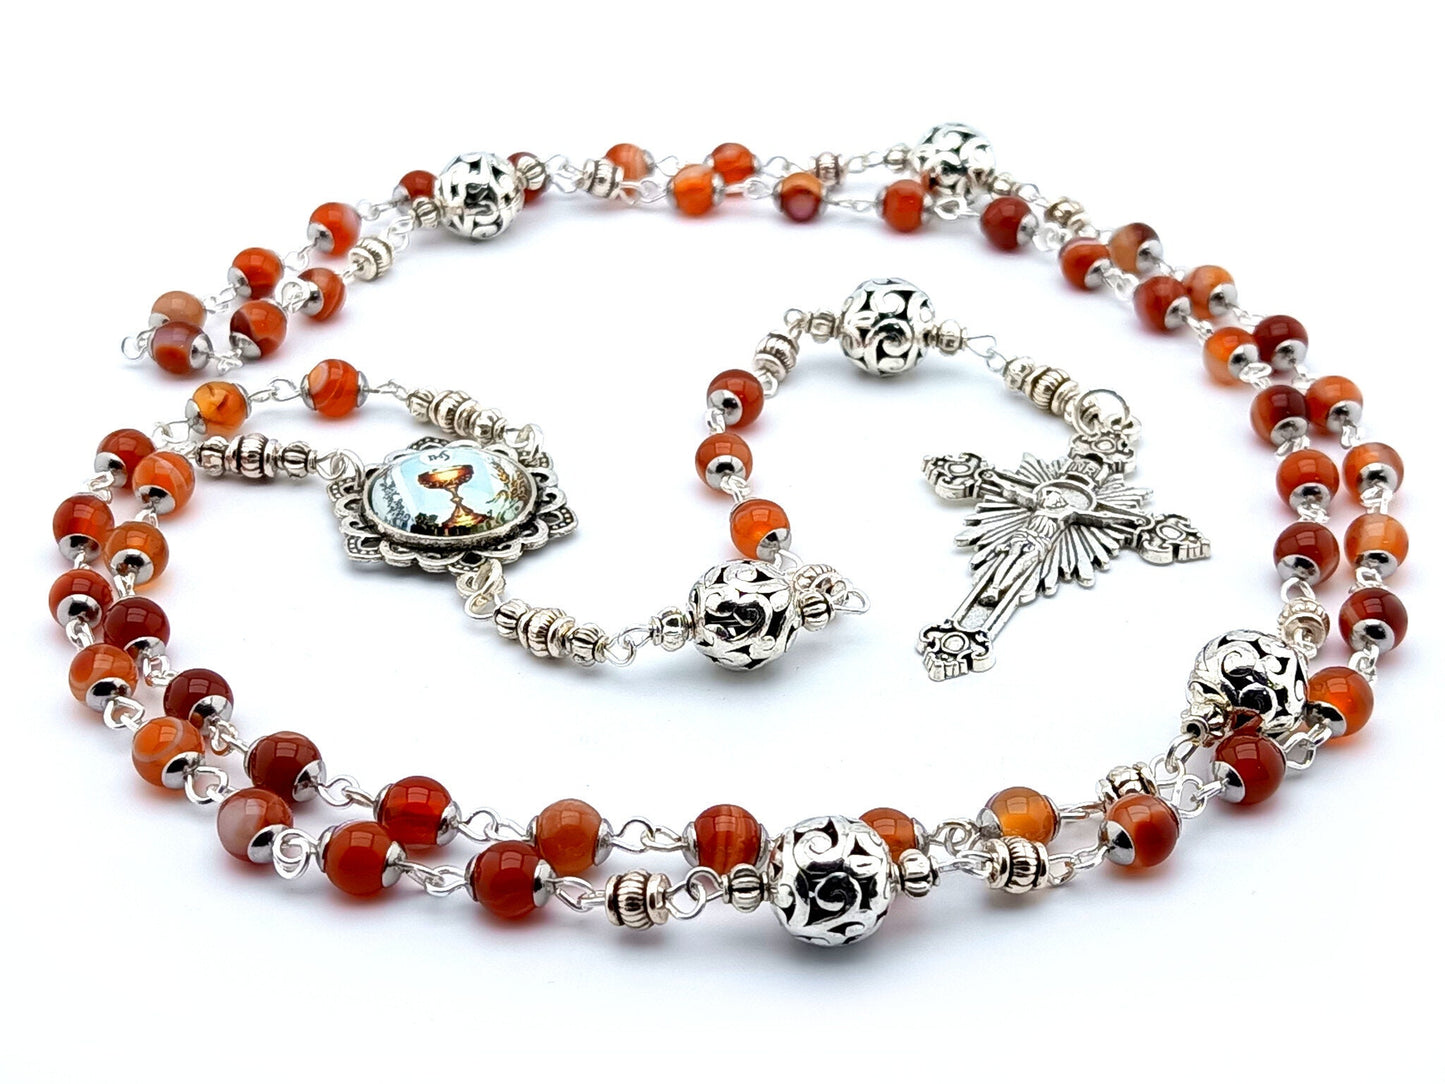 First Holy Communion unique rosary beads with red agate gemstone beads, silver pater beads, silver sunburst crucifix and picture centre medal.